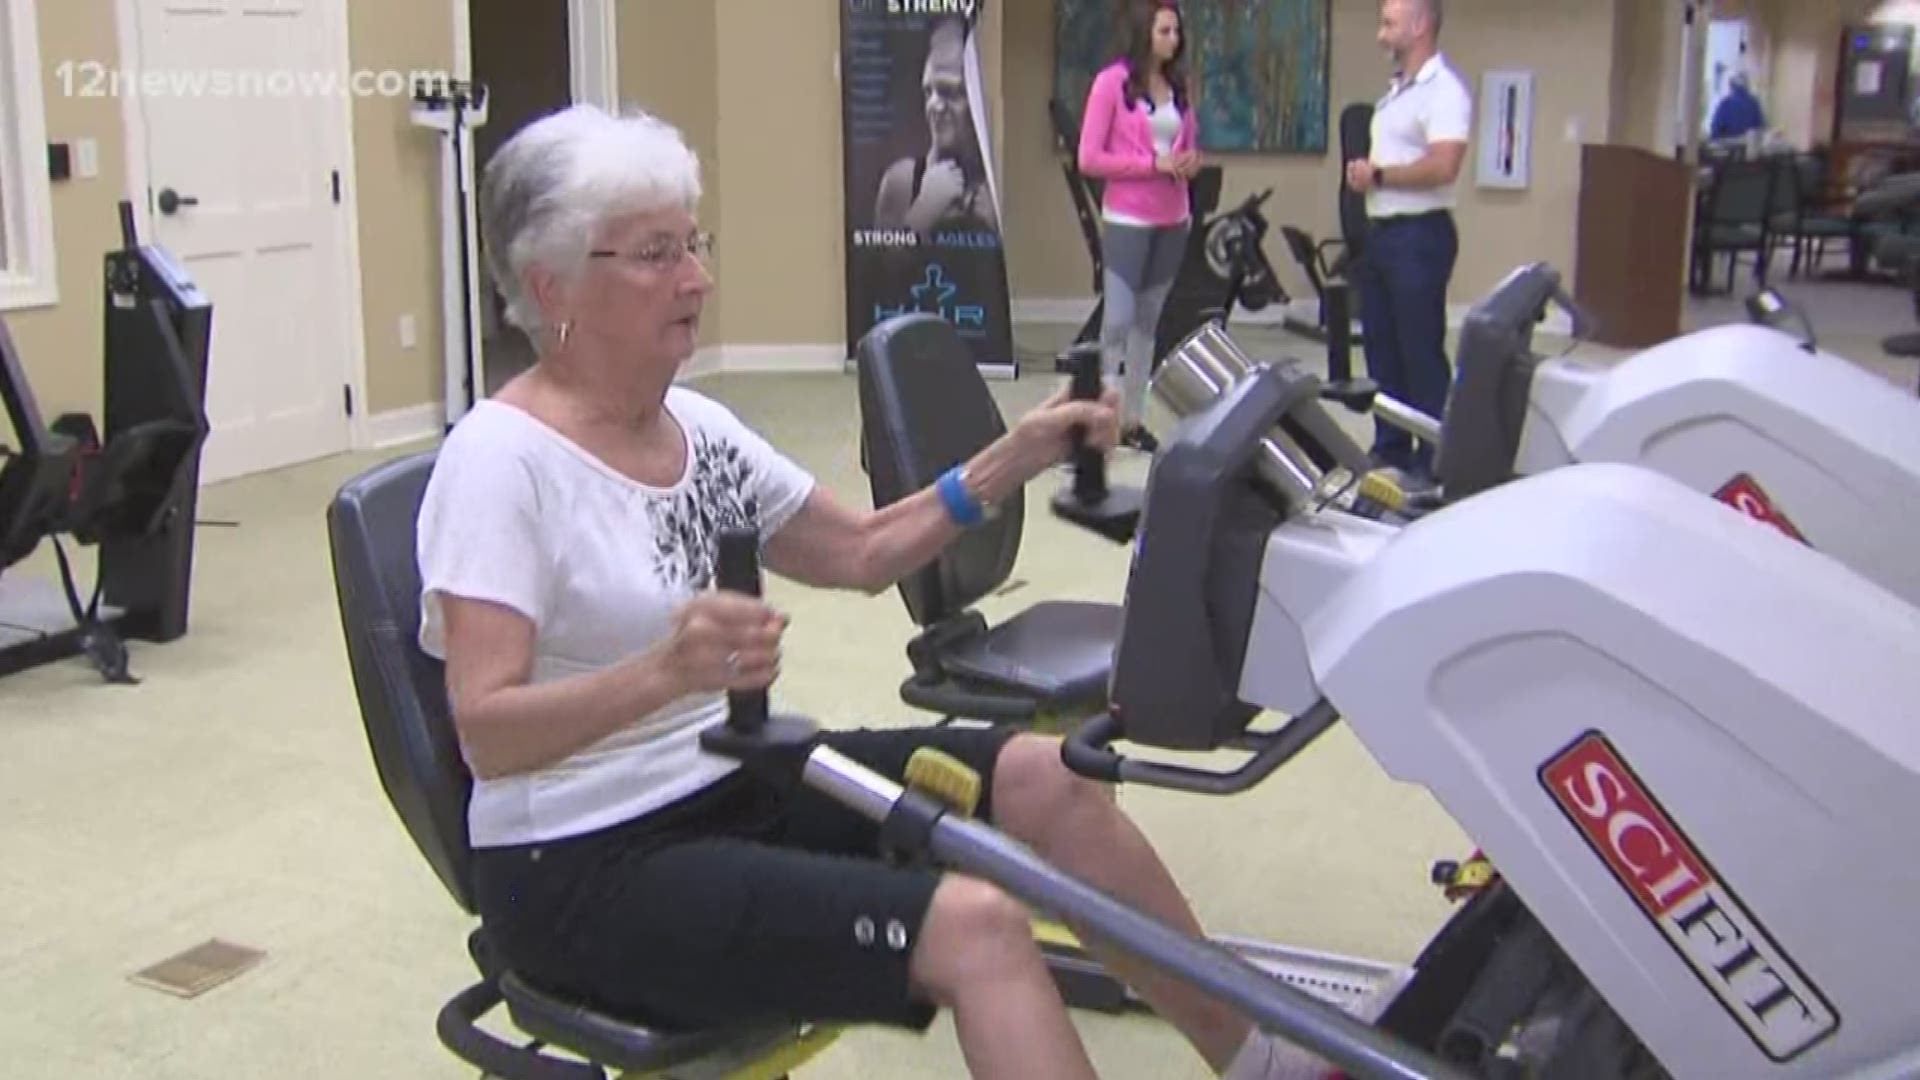 Wednesday, thousands of older adults participated in the 26th annual National Senior Health and Fitness Day. The goal is to help keep older Americans healthy and fit.